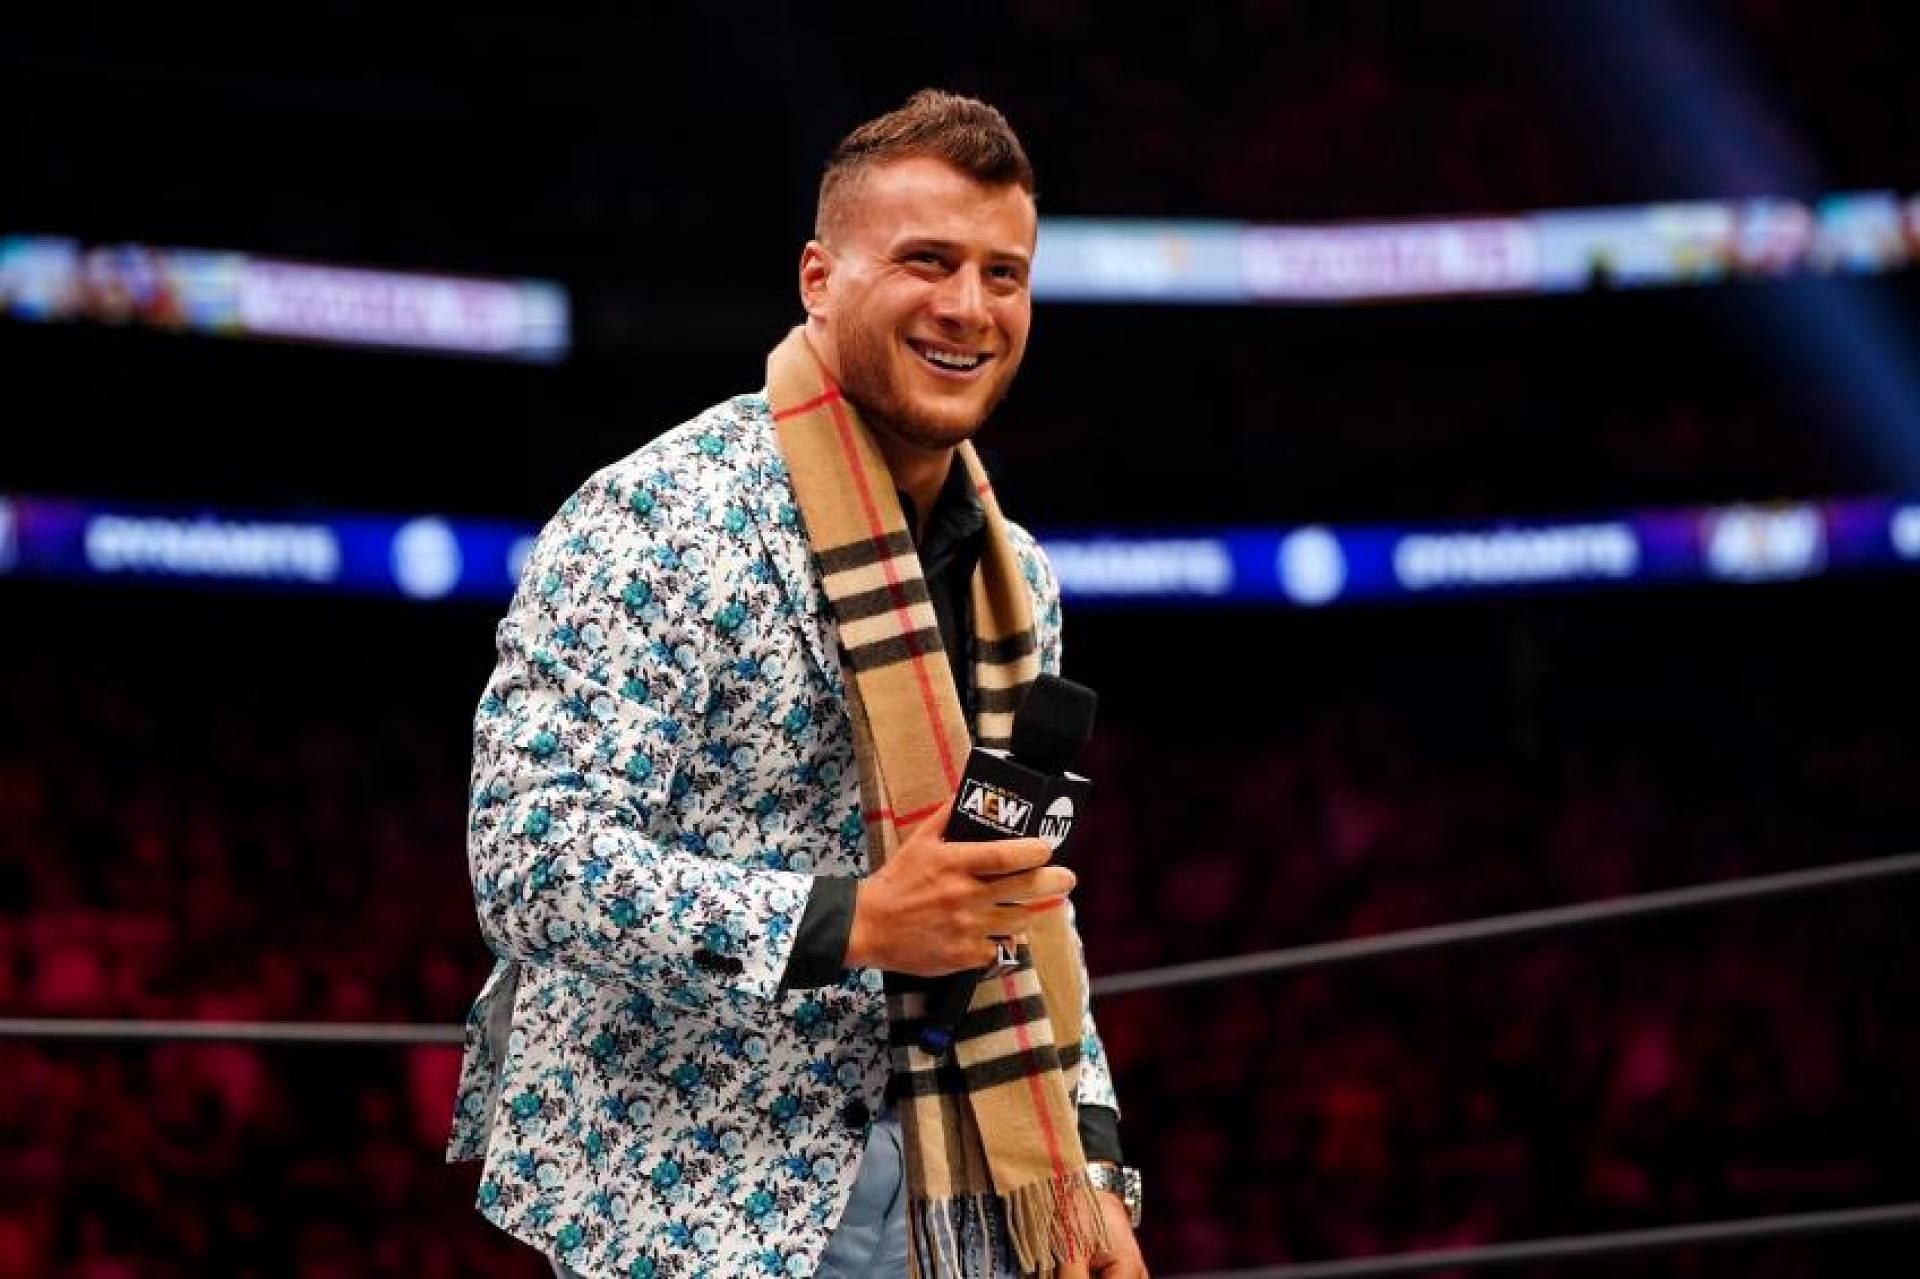 MJF, The Salt of the Earth, was recently praised by a notable WCW legend and WWE Hall of Famer.